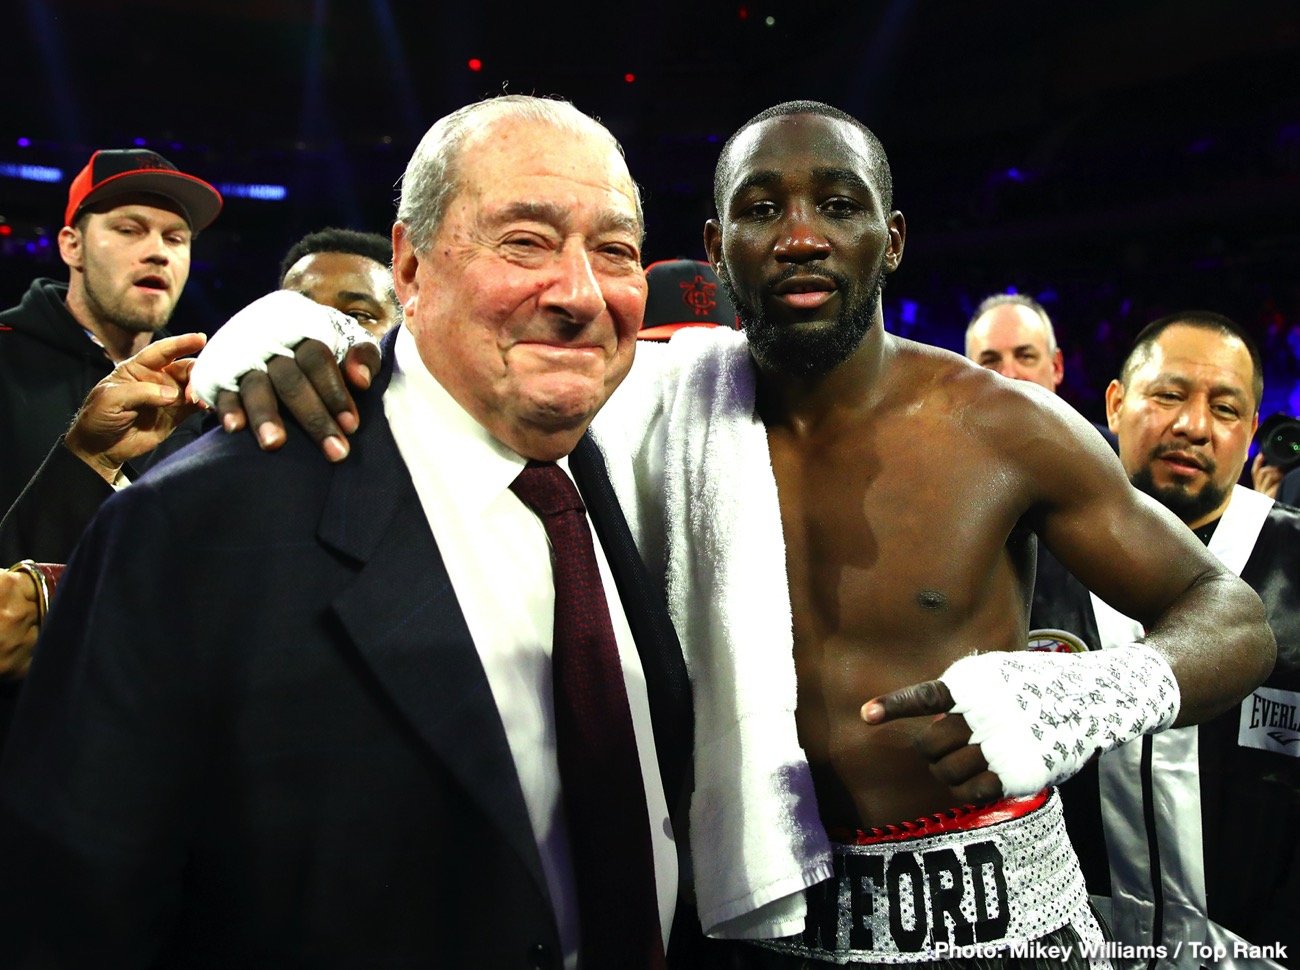 Image: Terence Crawford vs. Shawn Porter to be announced next week for Nov.20th in Las Vegas - says Bob Arum